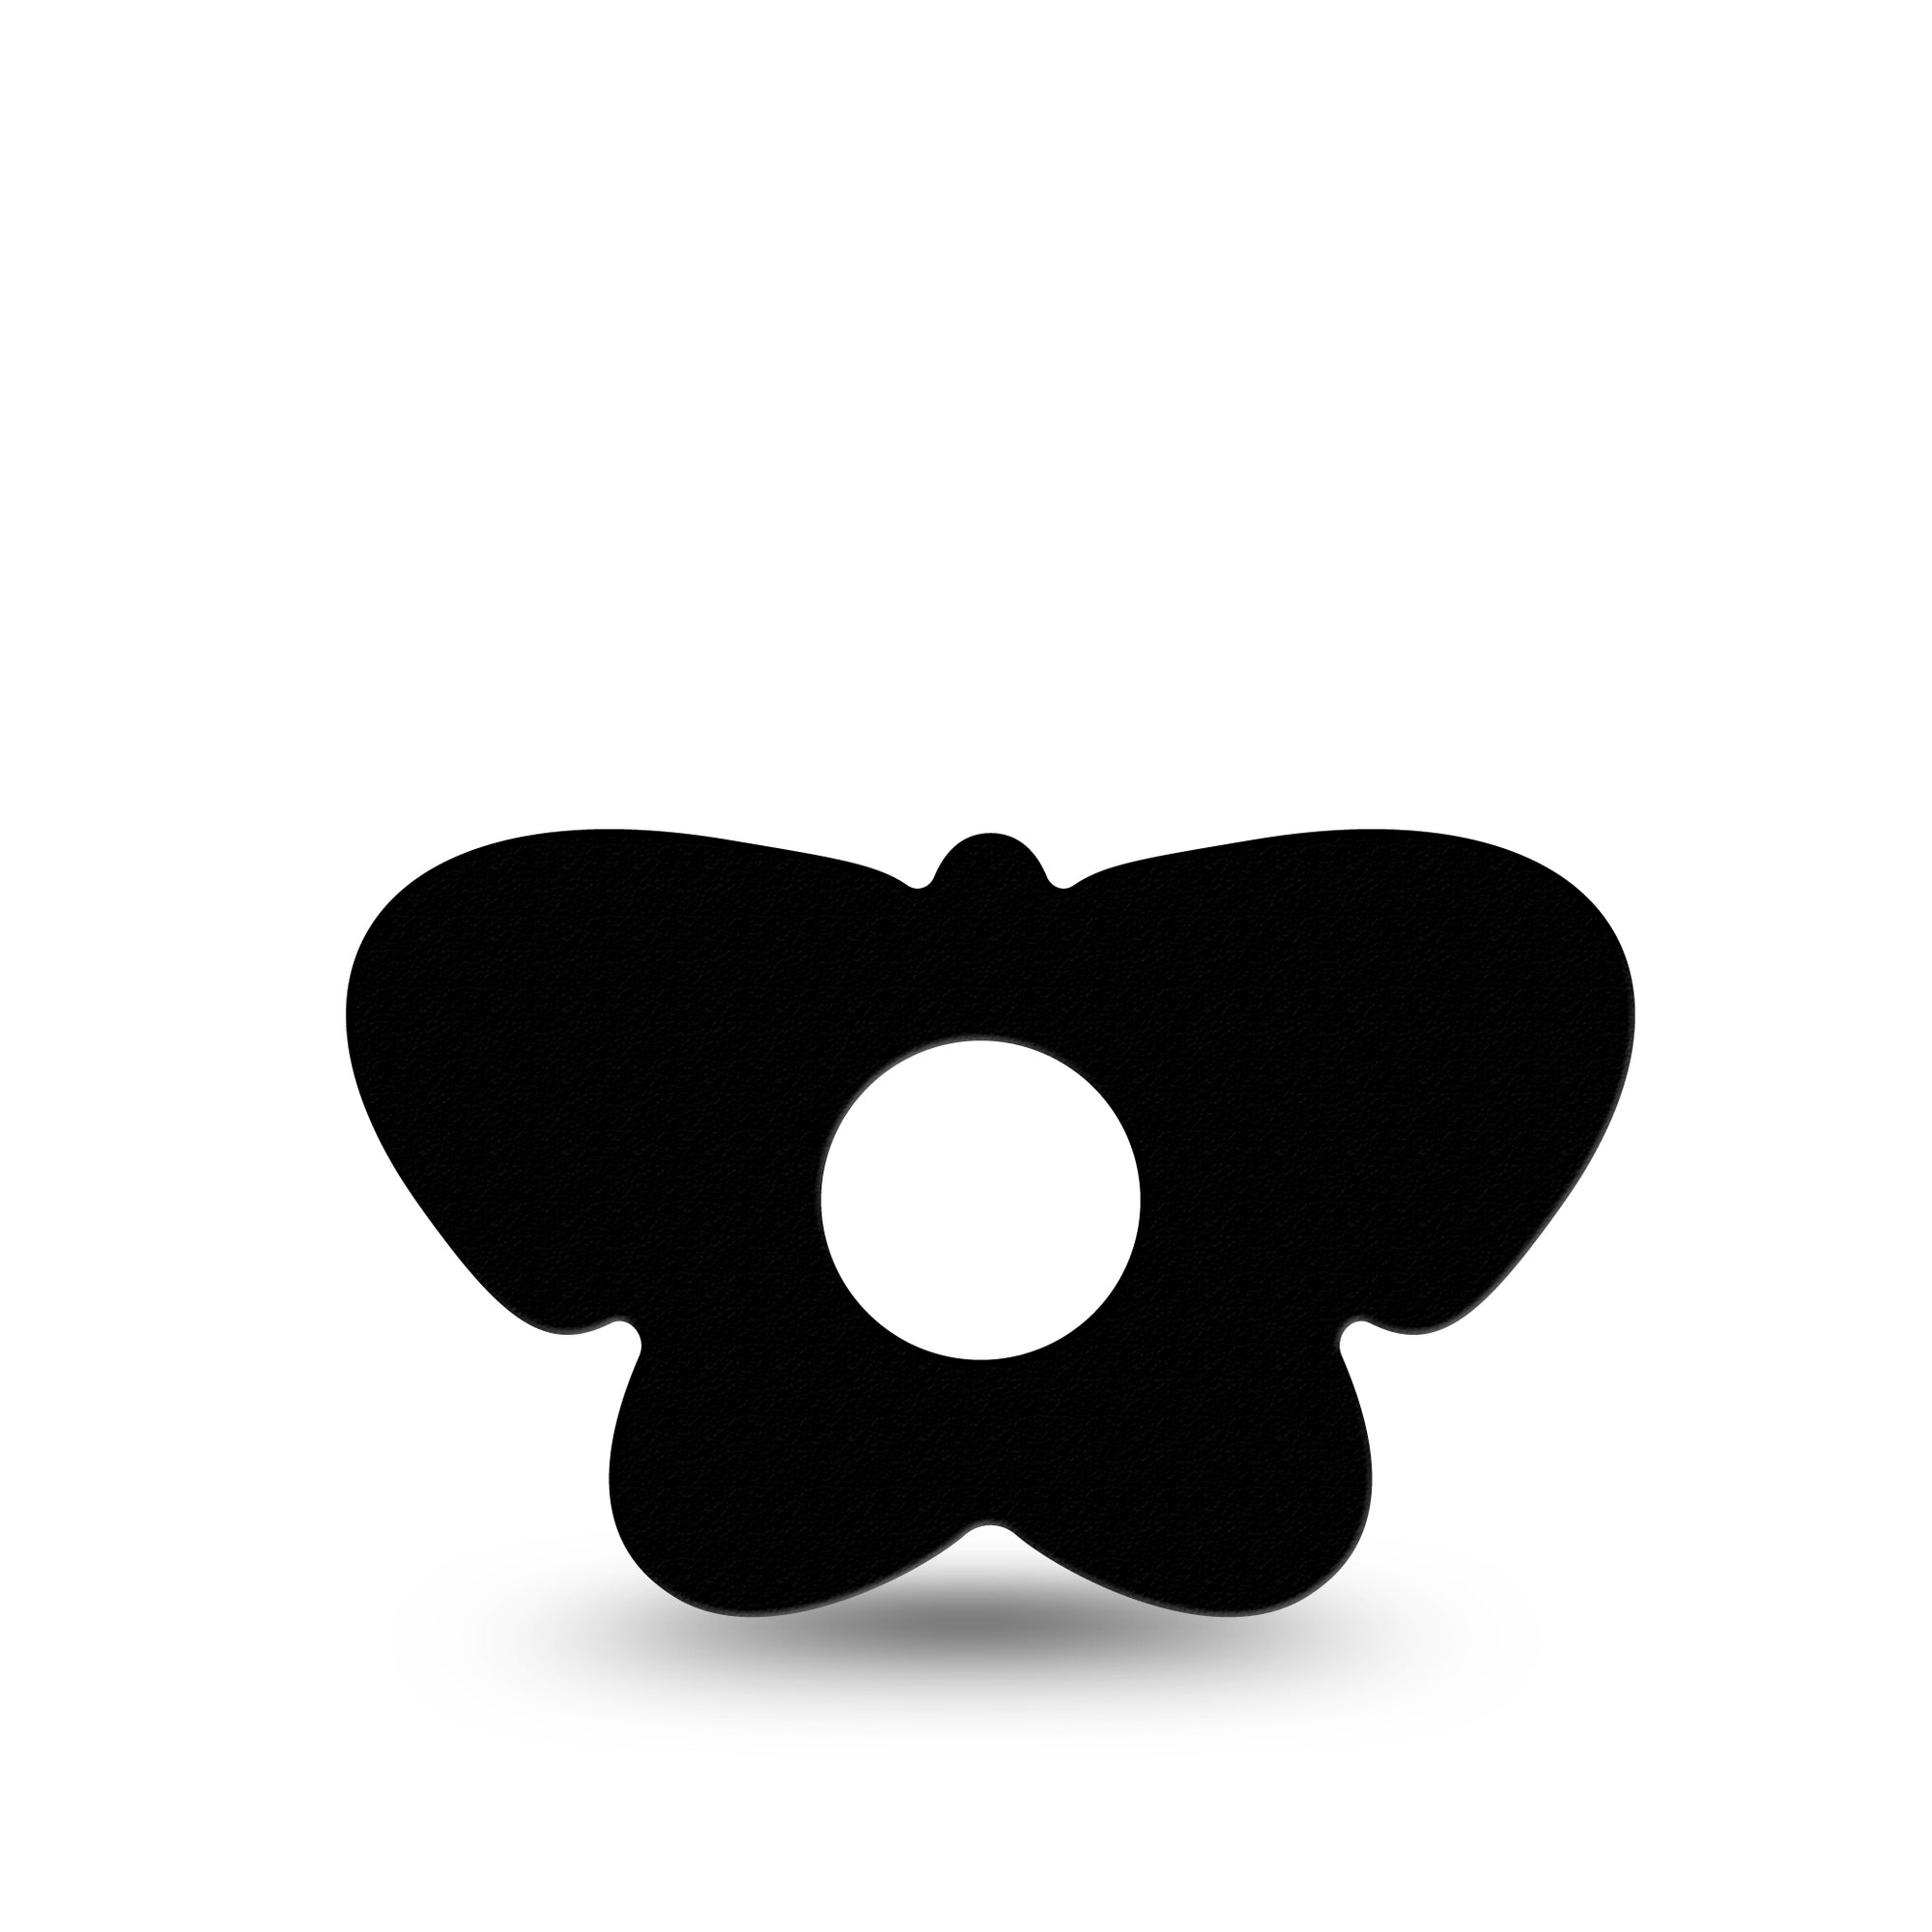 ExpressionMed Black Butterfly Libre 3 Tape, Single, Coal Black Inspired, CGM Overlay Patch Design